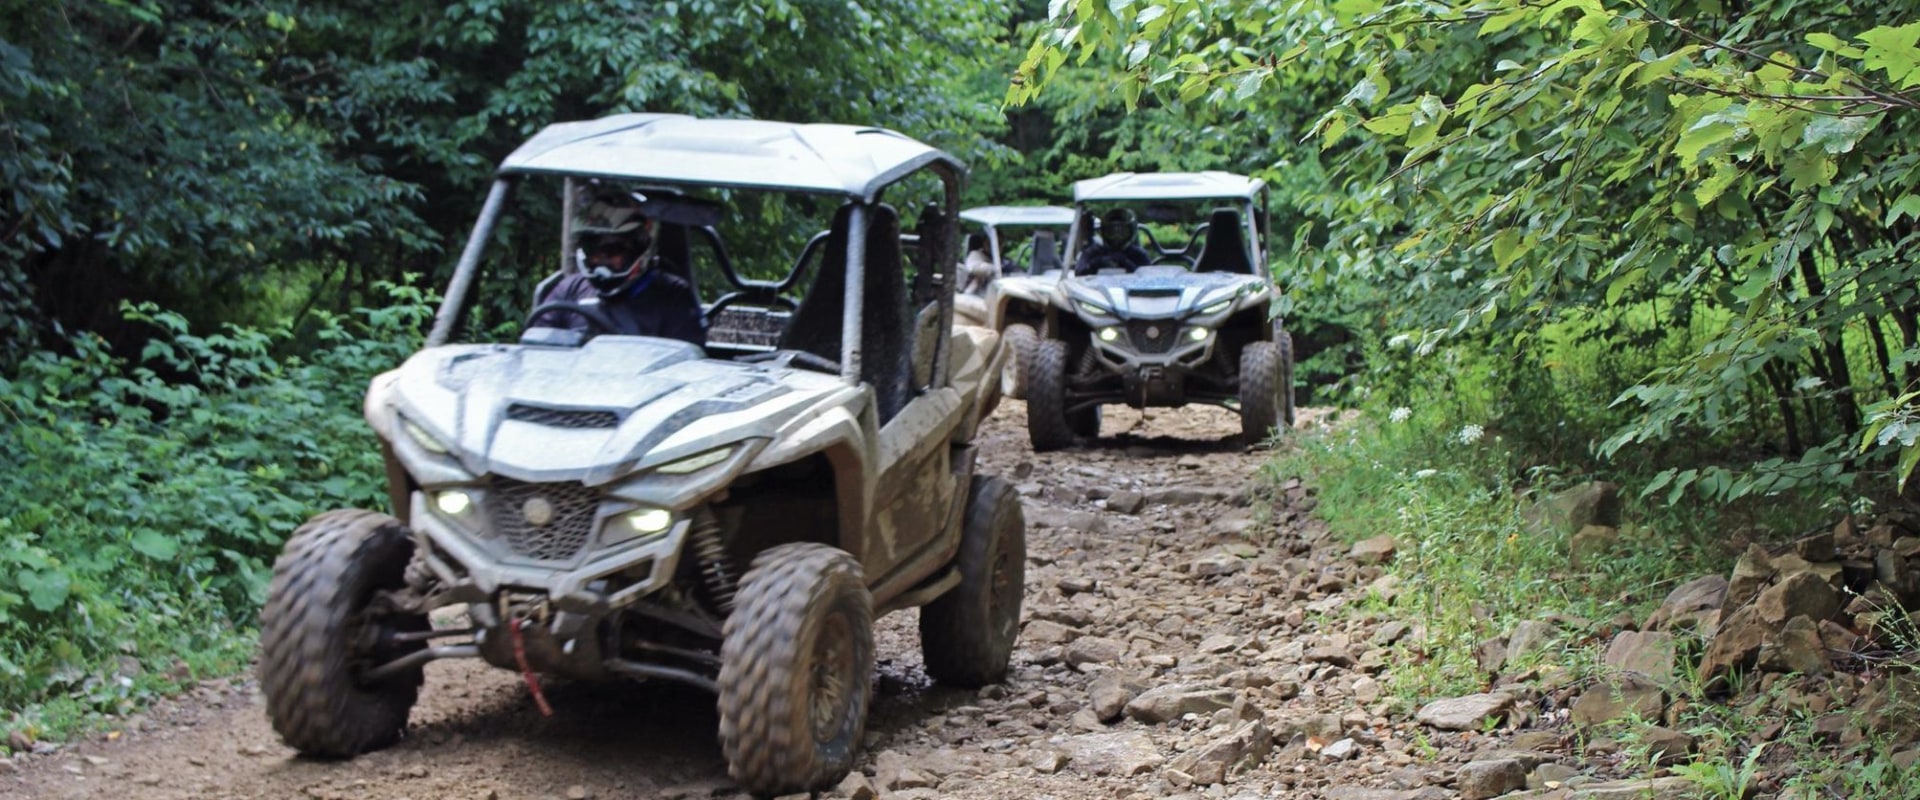 What is the Cost of Admission to an Offroad Park in New York?